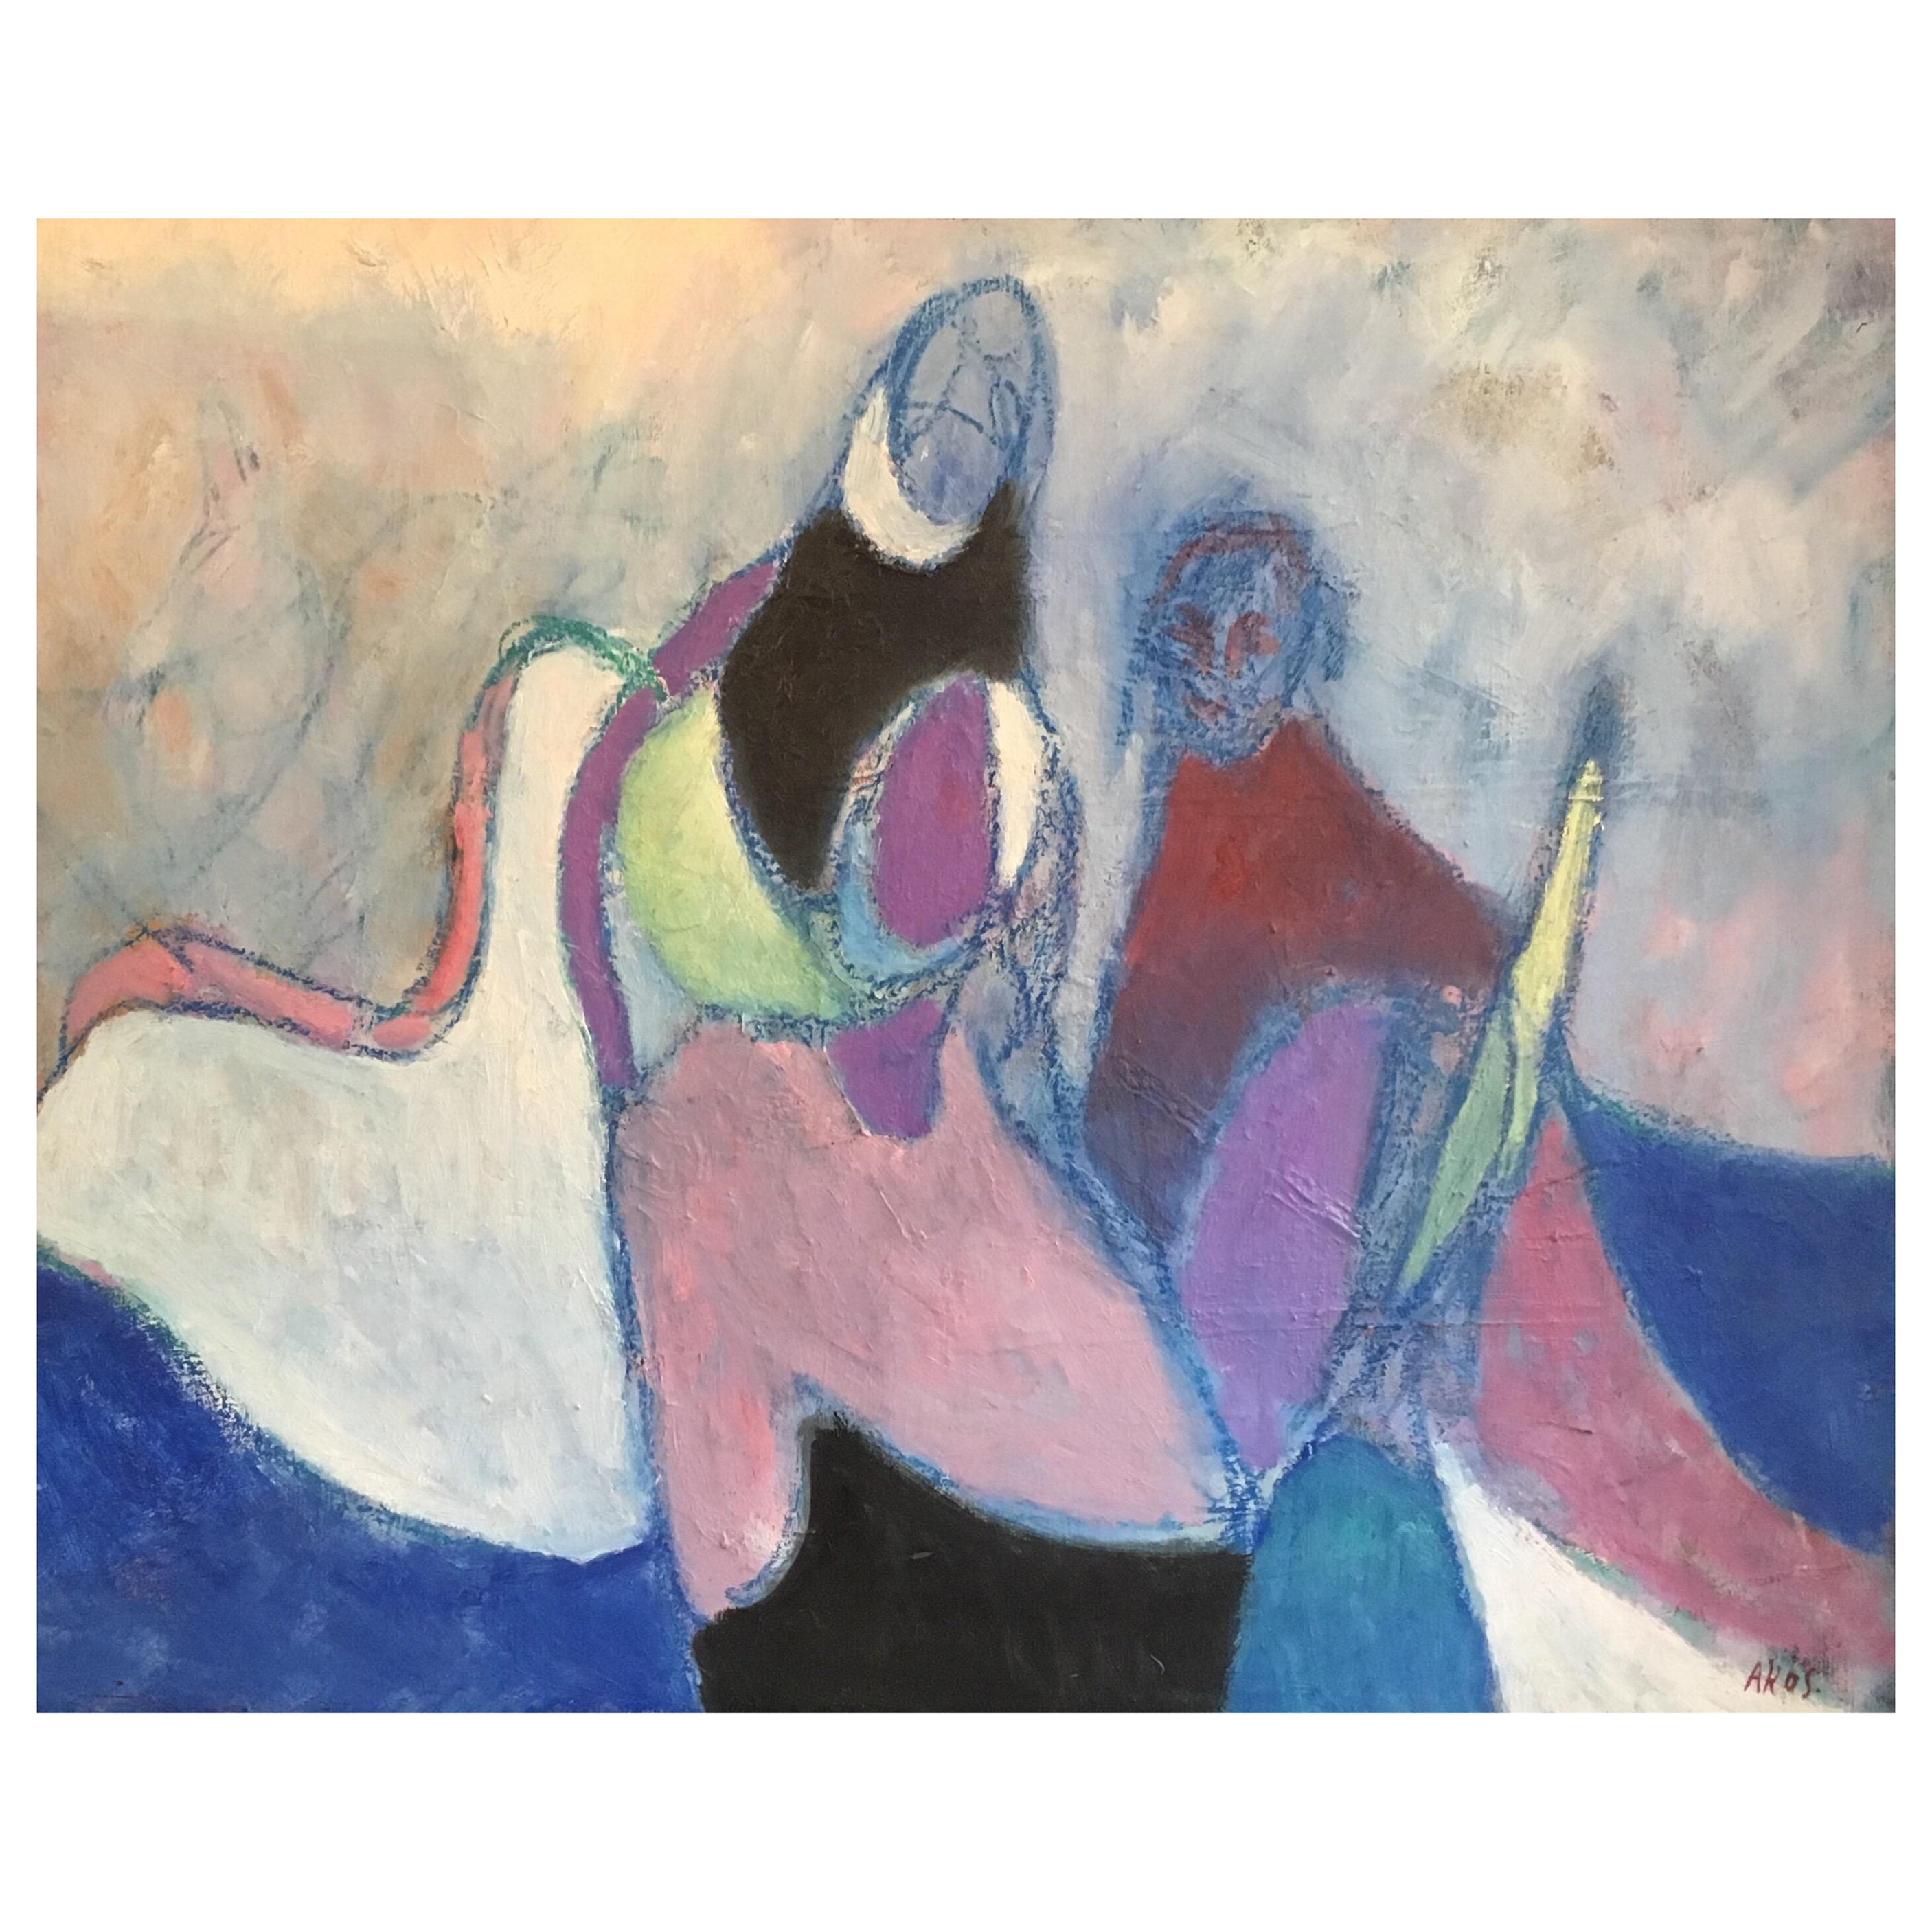 Akos Biro Portrait Painting - Huge MultiColoured French Abstract Cubist Figures Dancing Original Oil Painting 